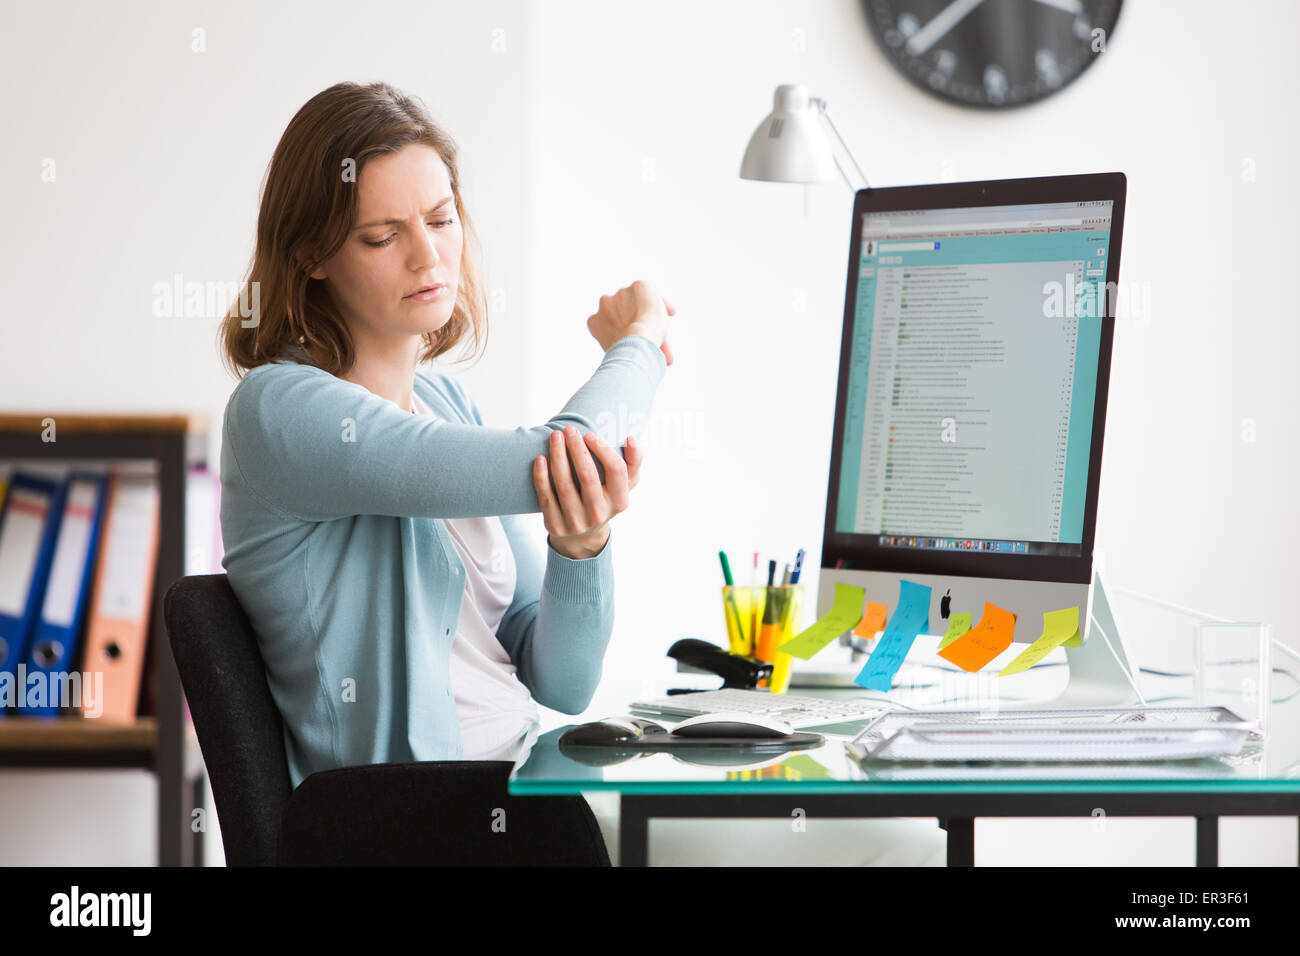 Woman at work suffering from elbow pain. Stock Photo